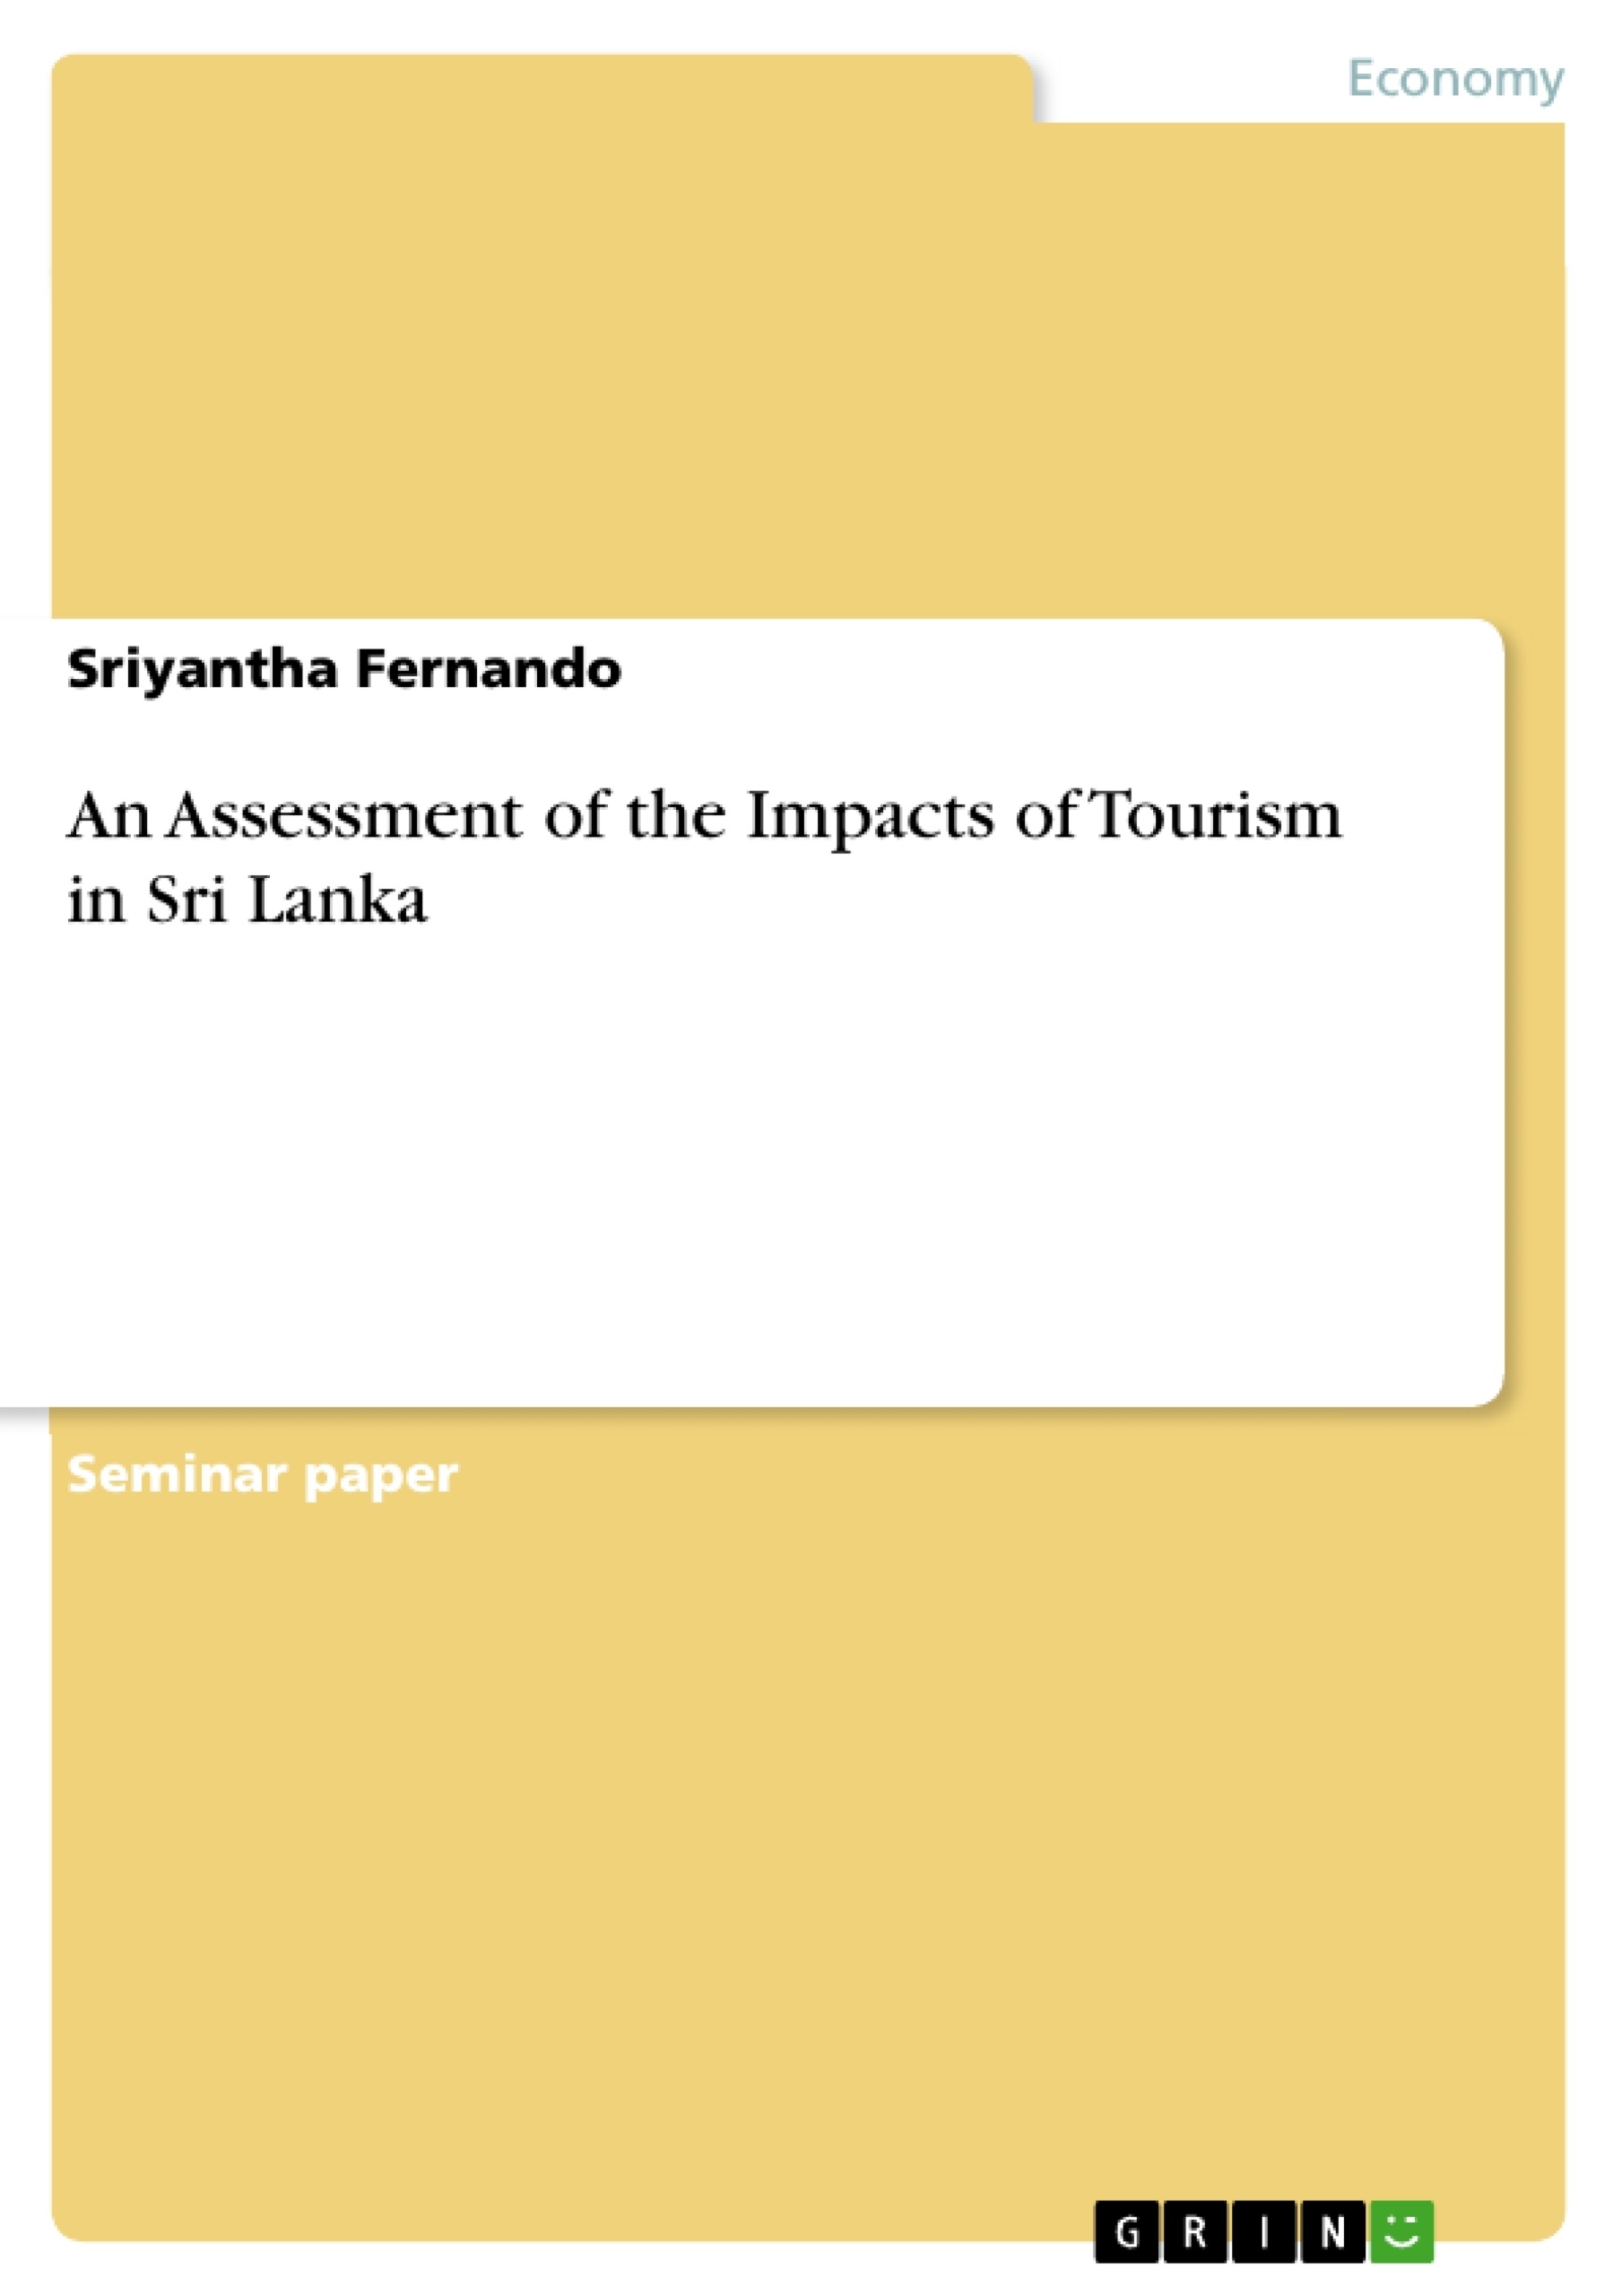 Title: An Assessment of the Impacts of Tourism in Sri Lanka